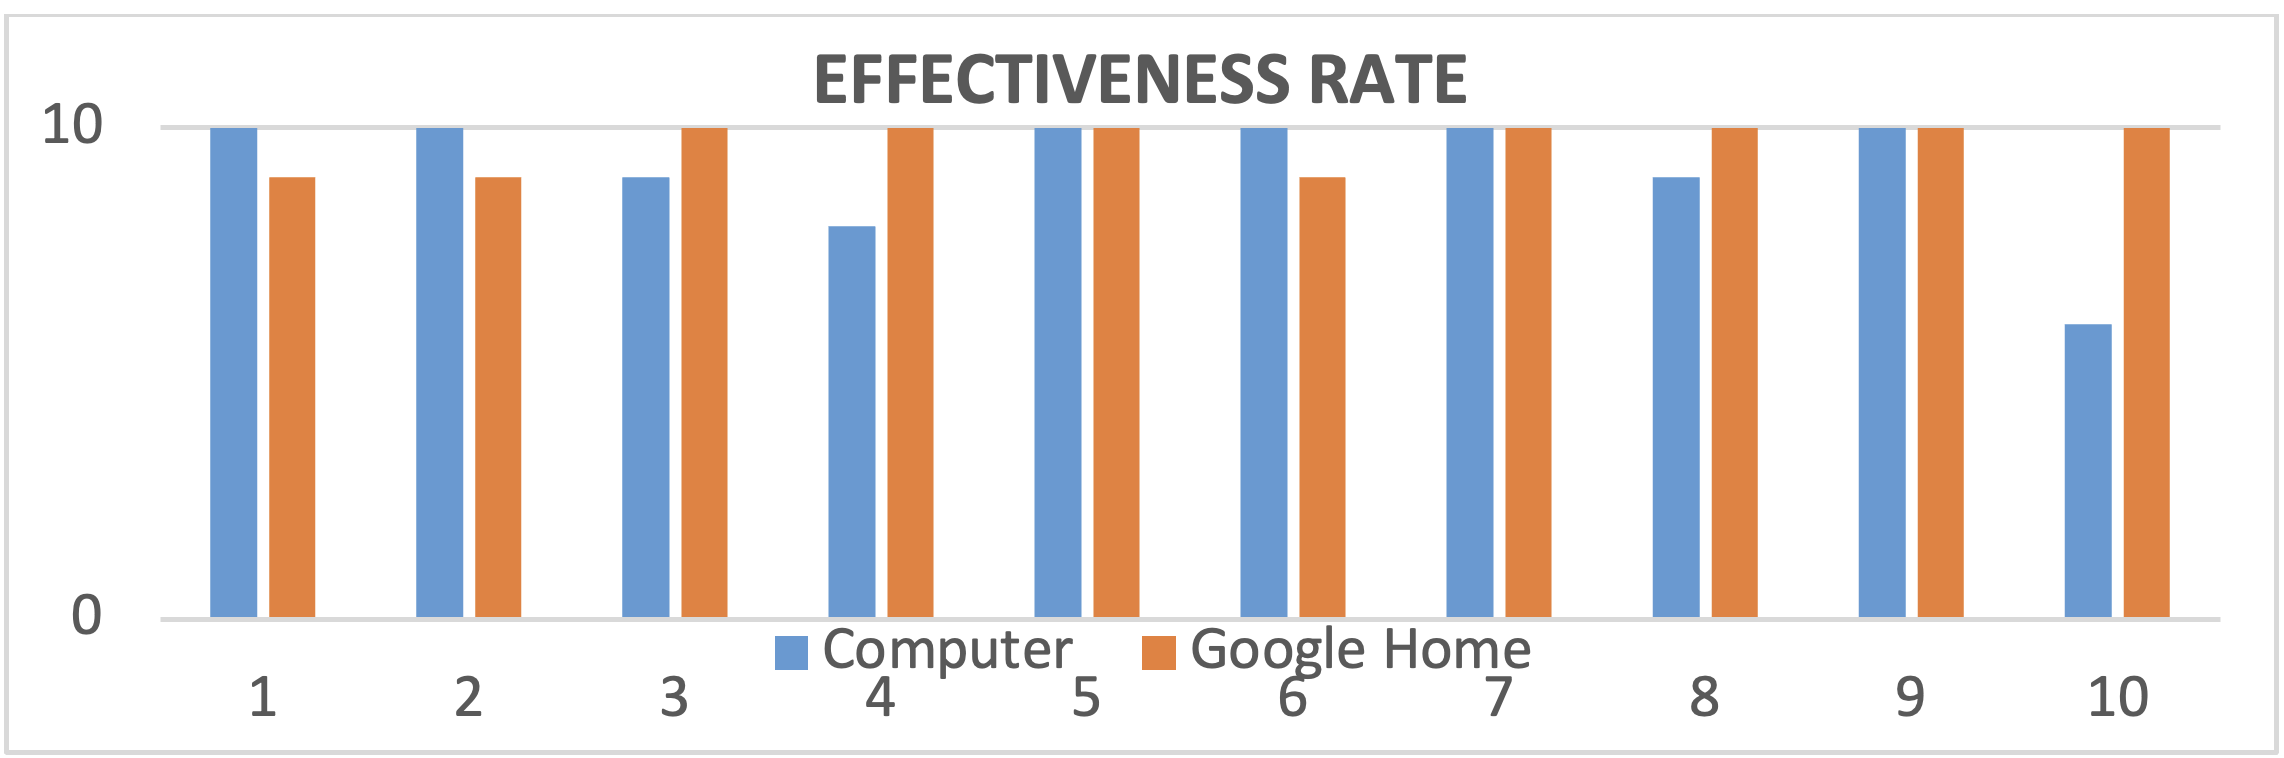 Bar chart comparing information retrieval effectiveness rates for use of desktop computer versus Google Home for mathematics questions showing greater effectiveness of Google Home over traditional devices.